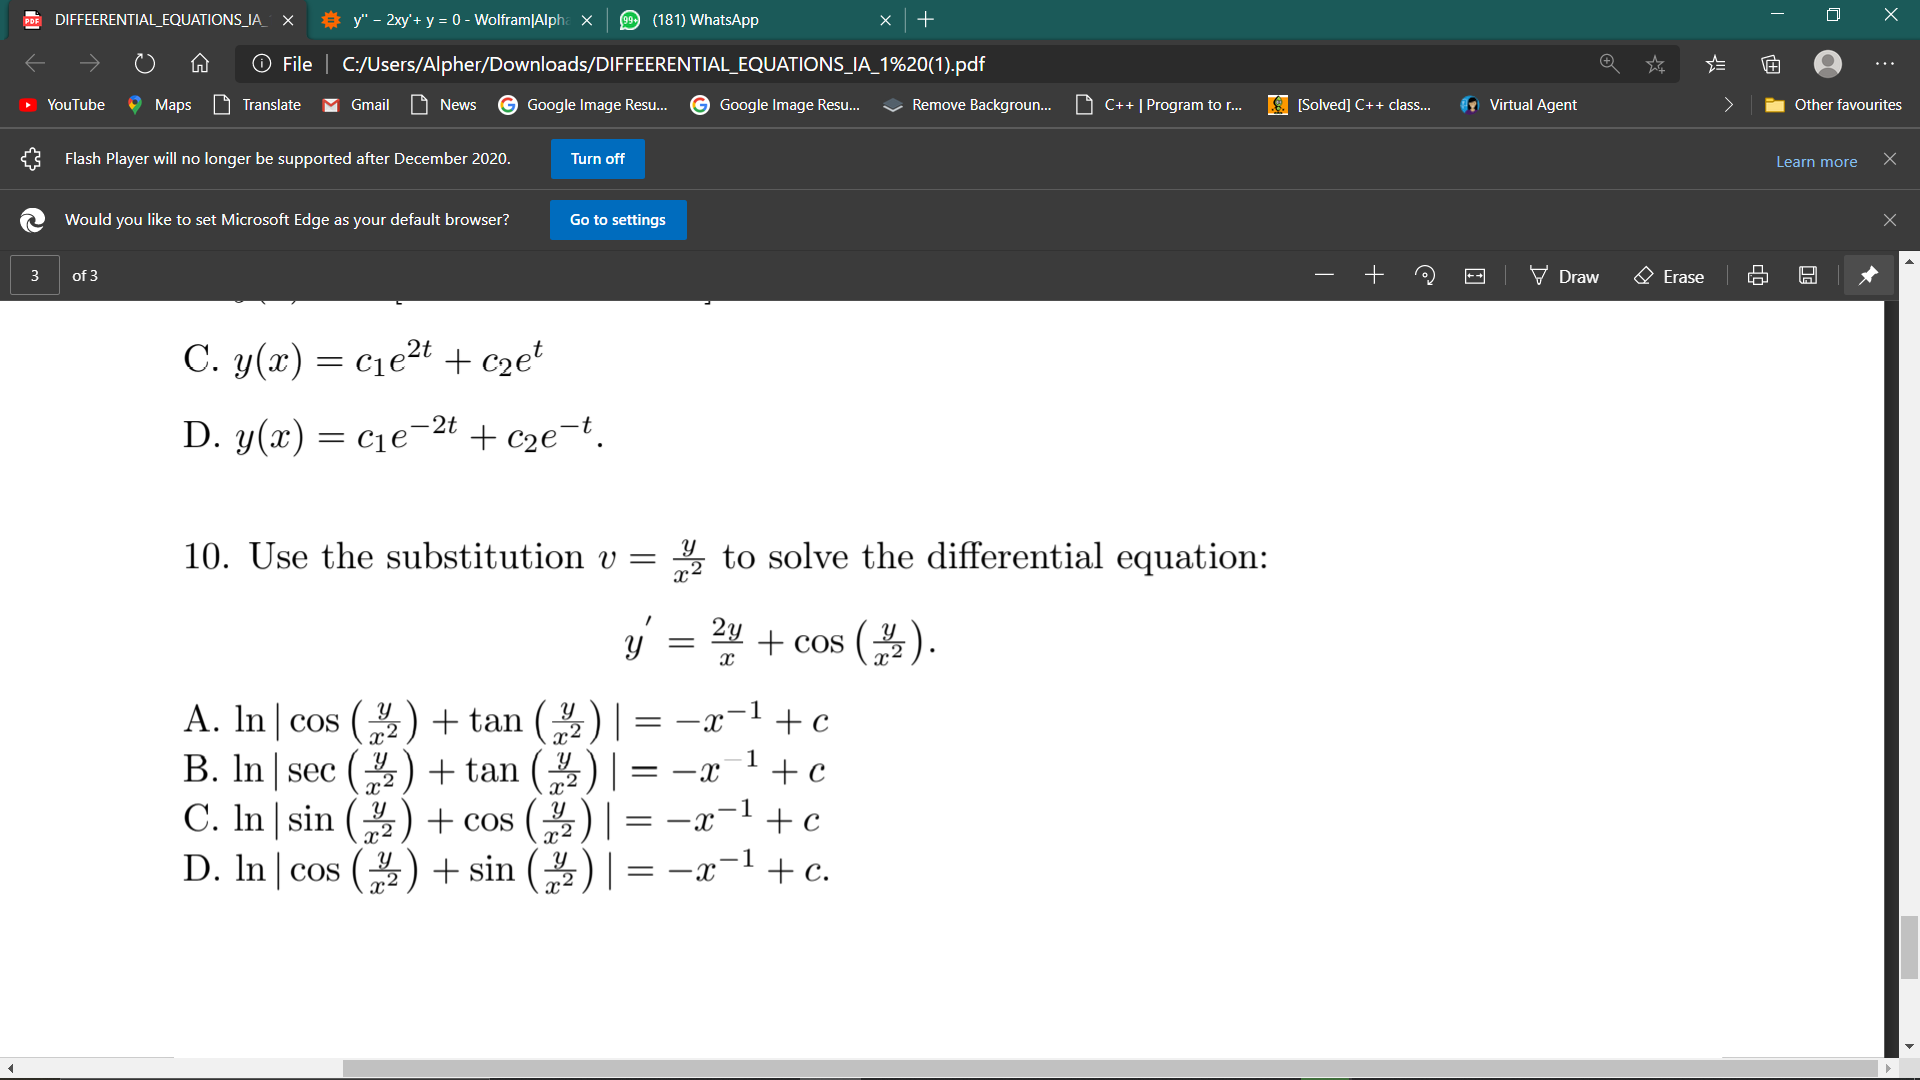 Use the substitution v =
4 to solve the differential equation:
24 + cos ().
